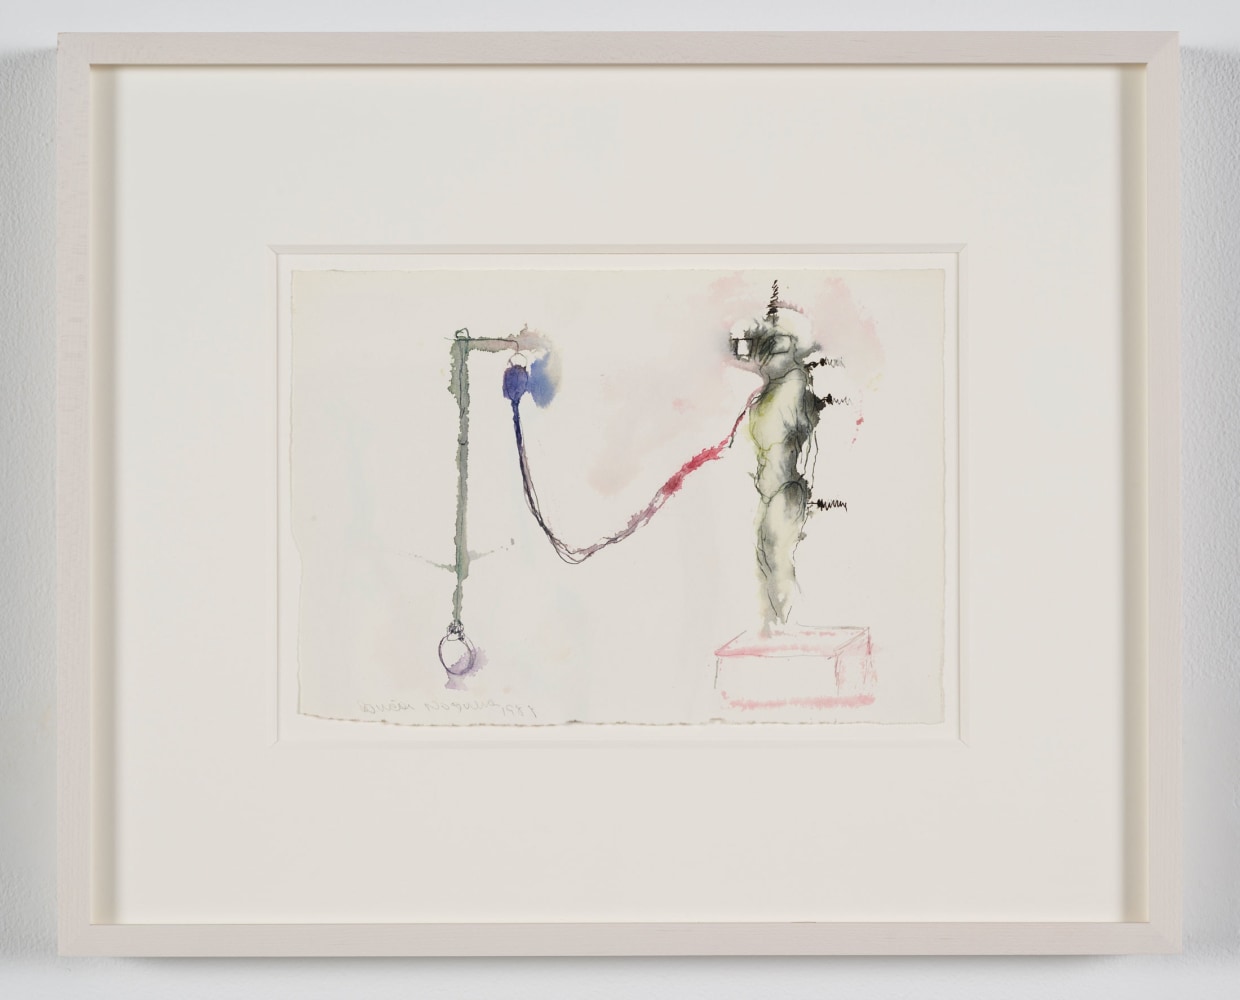 Lucia Nogueira
Untitled, 1988
Watercolor on paper
Sheet size: 7 1/8 x 10 1/8 inches (18 x 25.5 cm)
Frame size: 13 5/8 x 16 5/8 inches (34.4 x 42.2 cm)